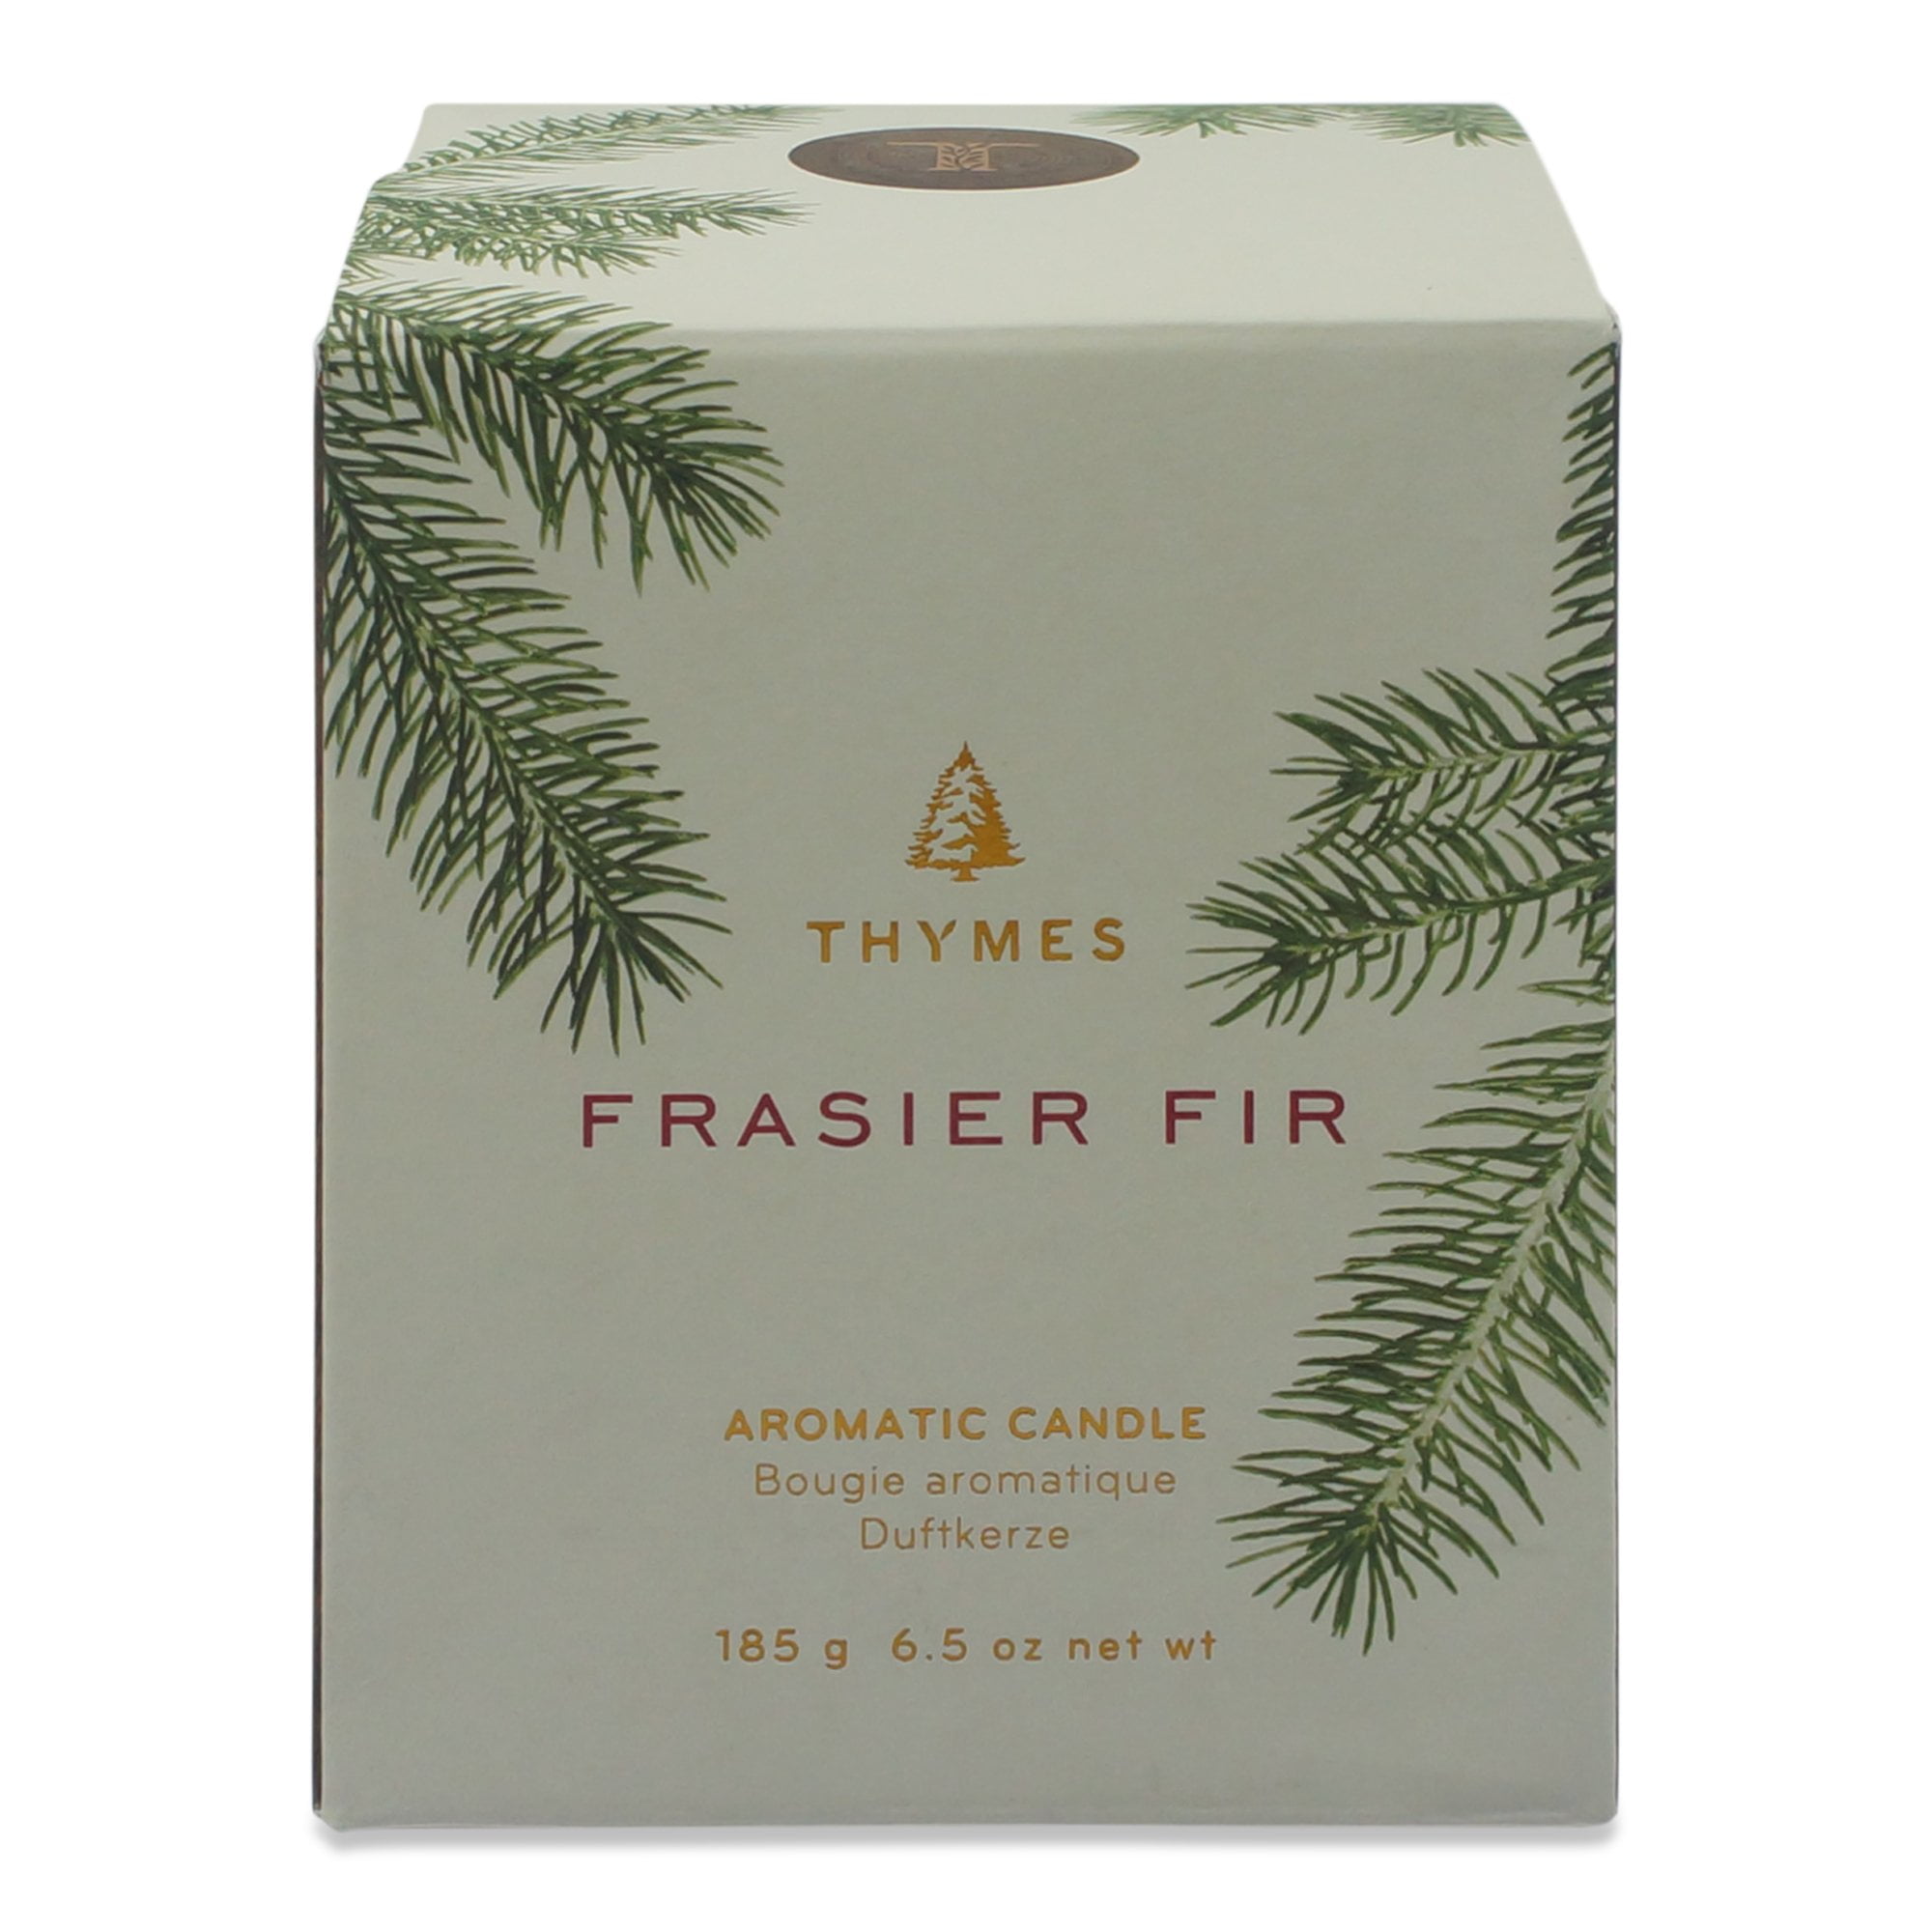  Thymes Frasier Fir Pine Needle Candle - Highly Scented Candles  for a Luxury Home Fragrance - Holiday Candles with a Forest Fragrance -  Single-Wick Candle (6.5 oz) : Home & Kitchen